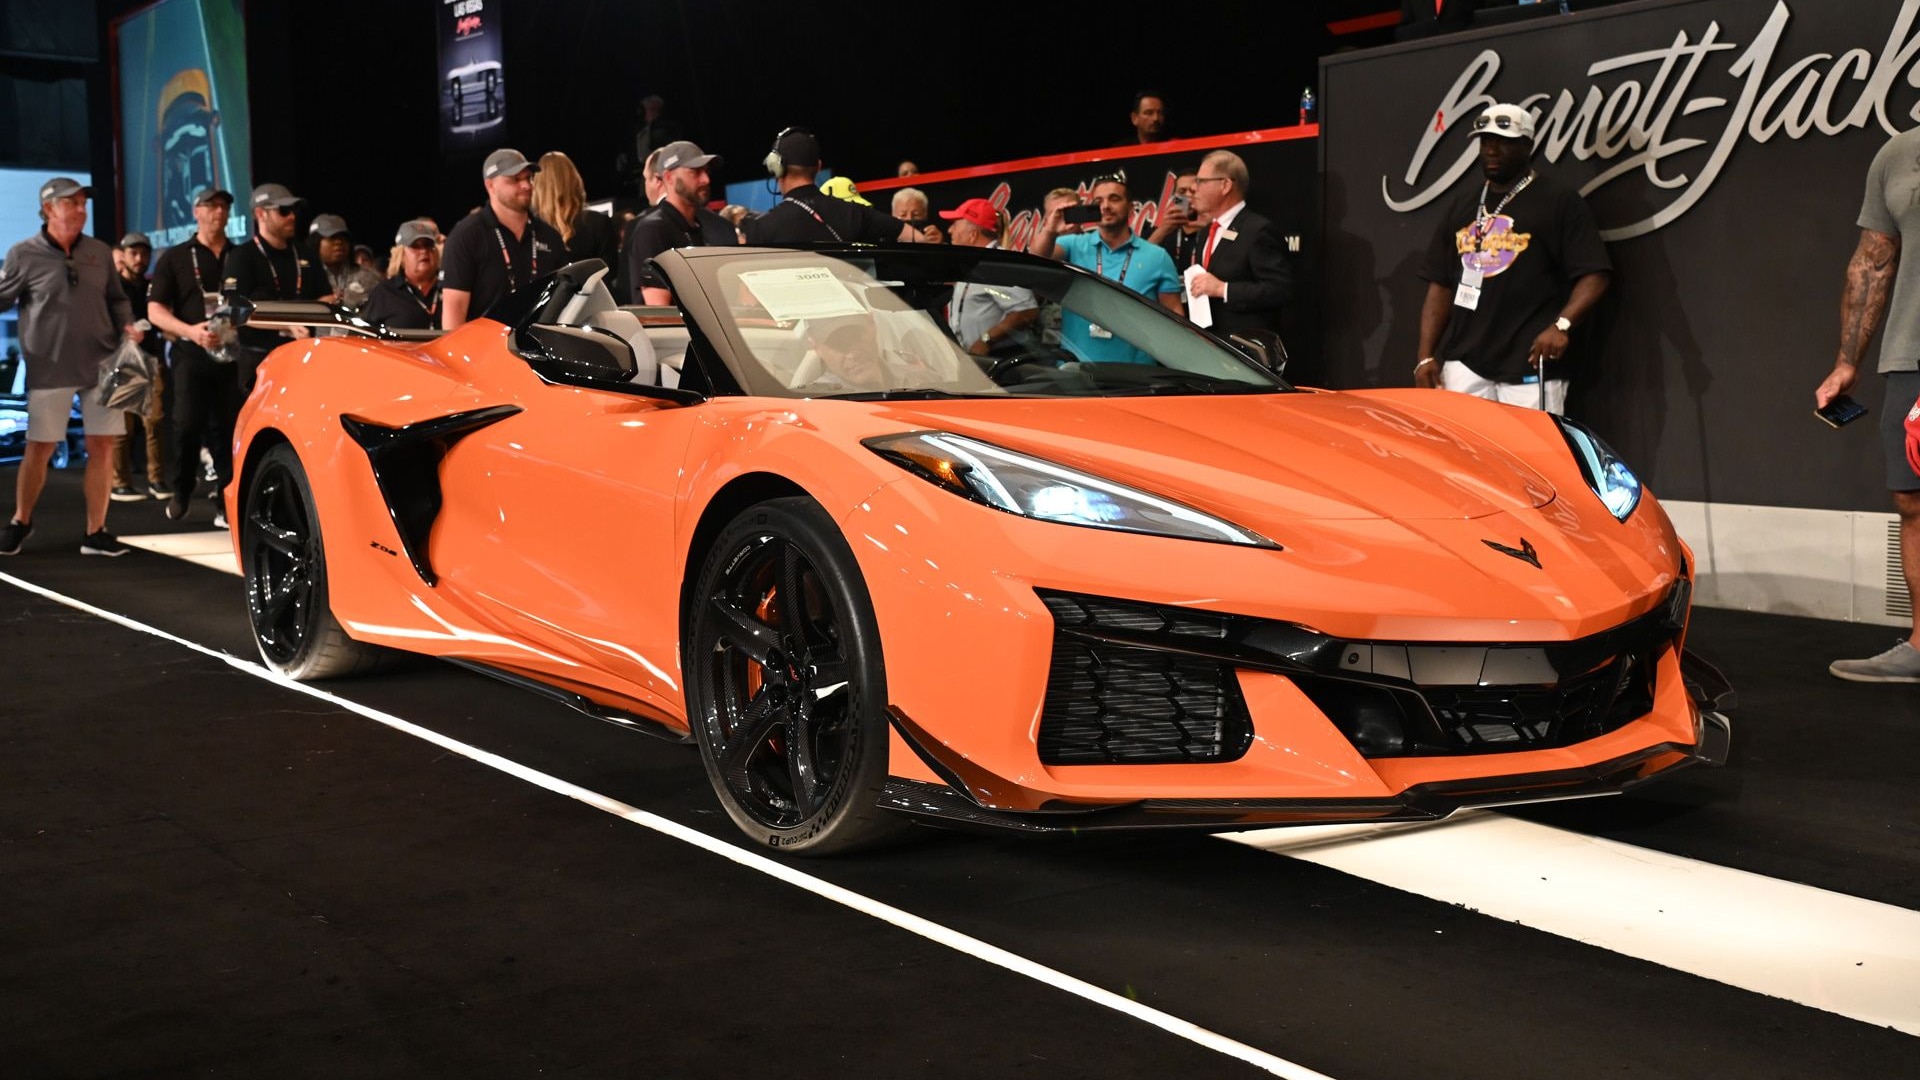 Rights to first retail 2023 Chevrolet Corvette Z06 Convertible sold at 2022 Barrett-Jackson auction